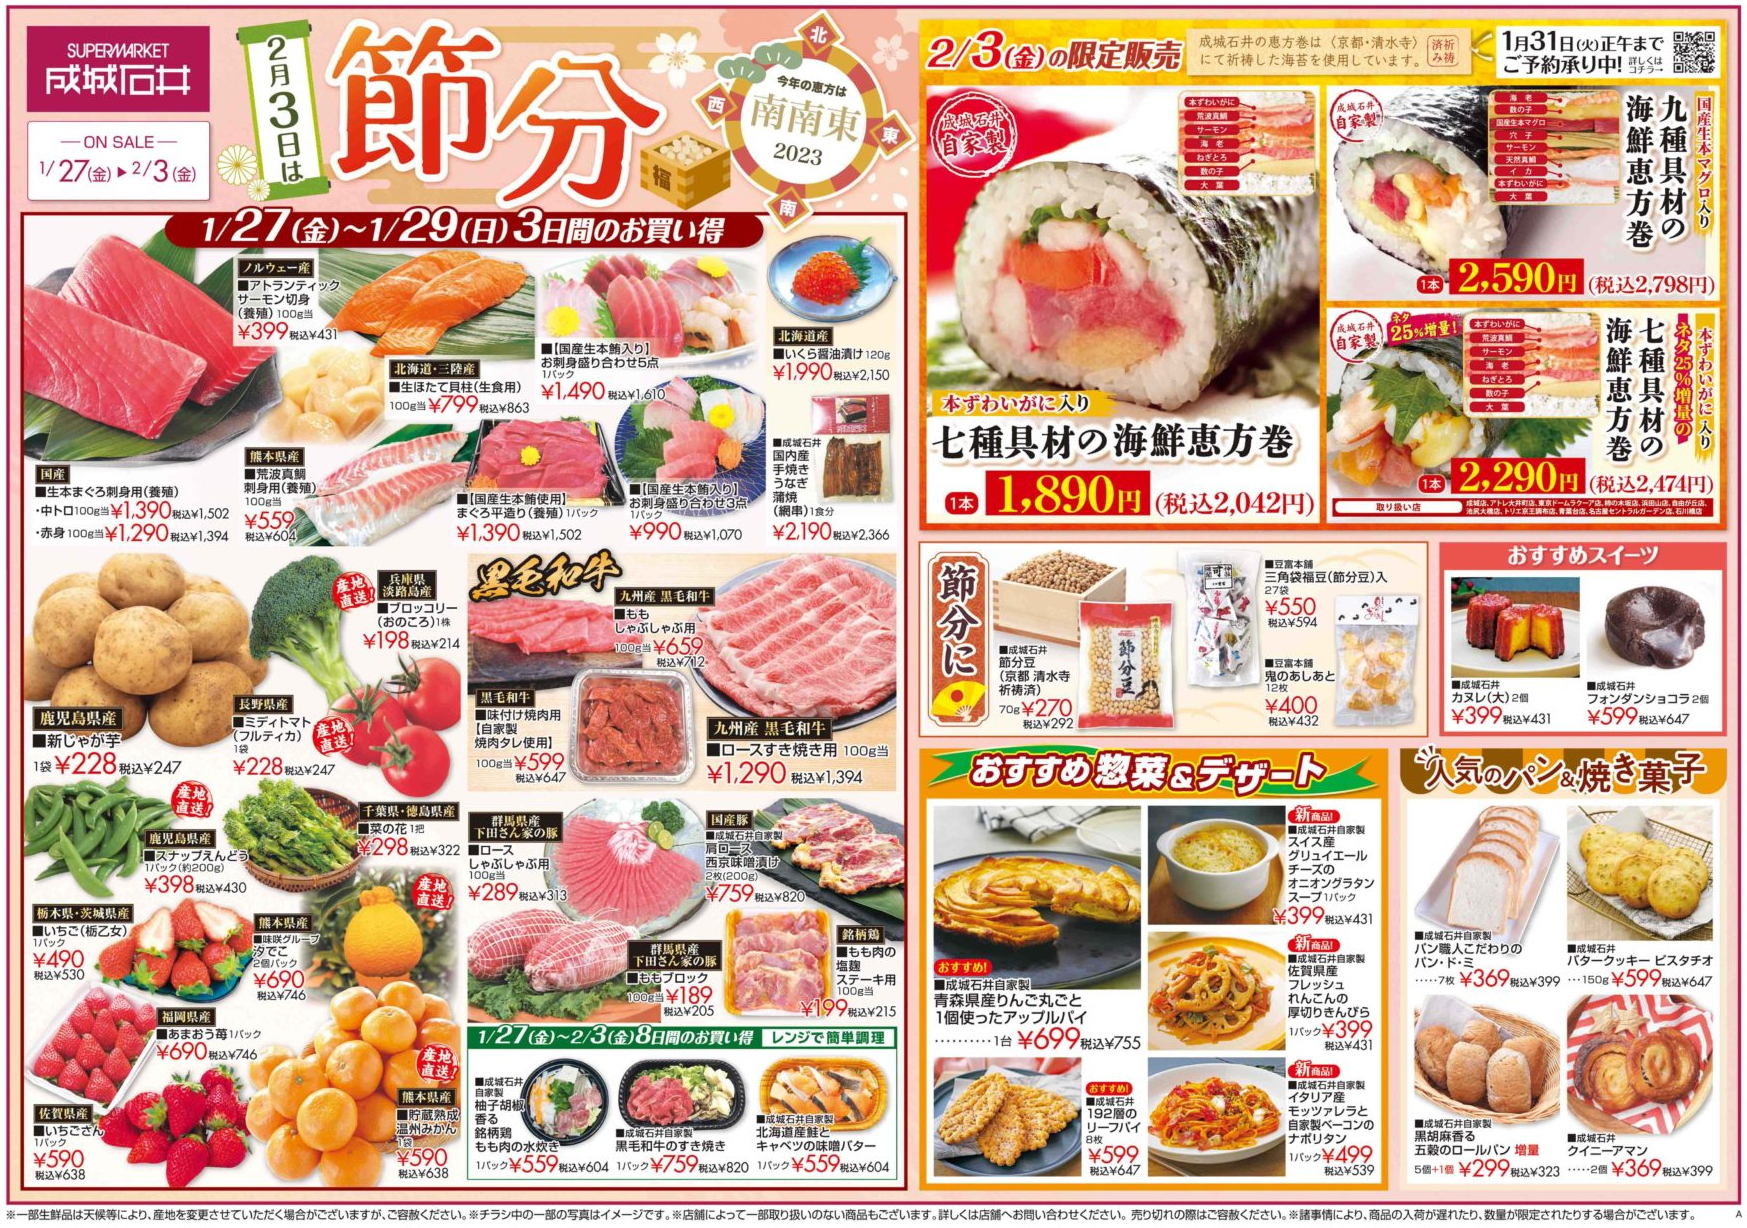 Flier from Seijo Ishii supermarket showing their setsubun sales offers.